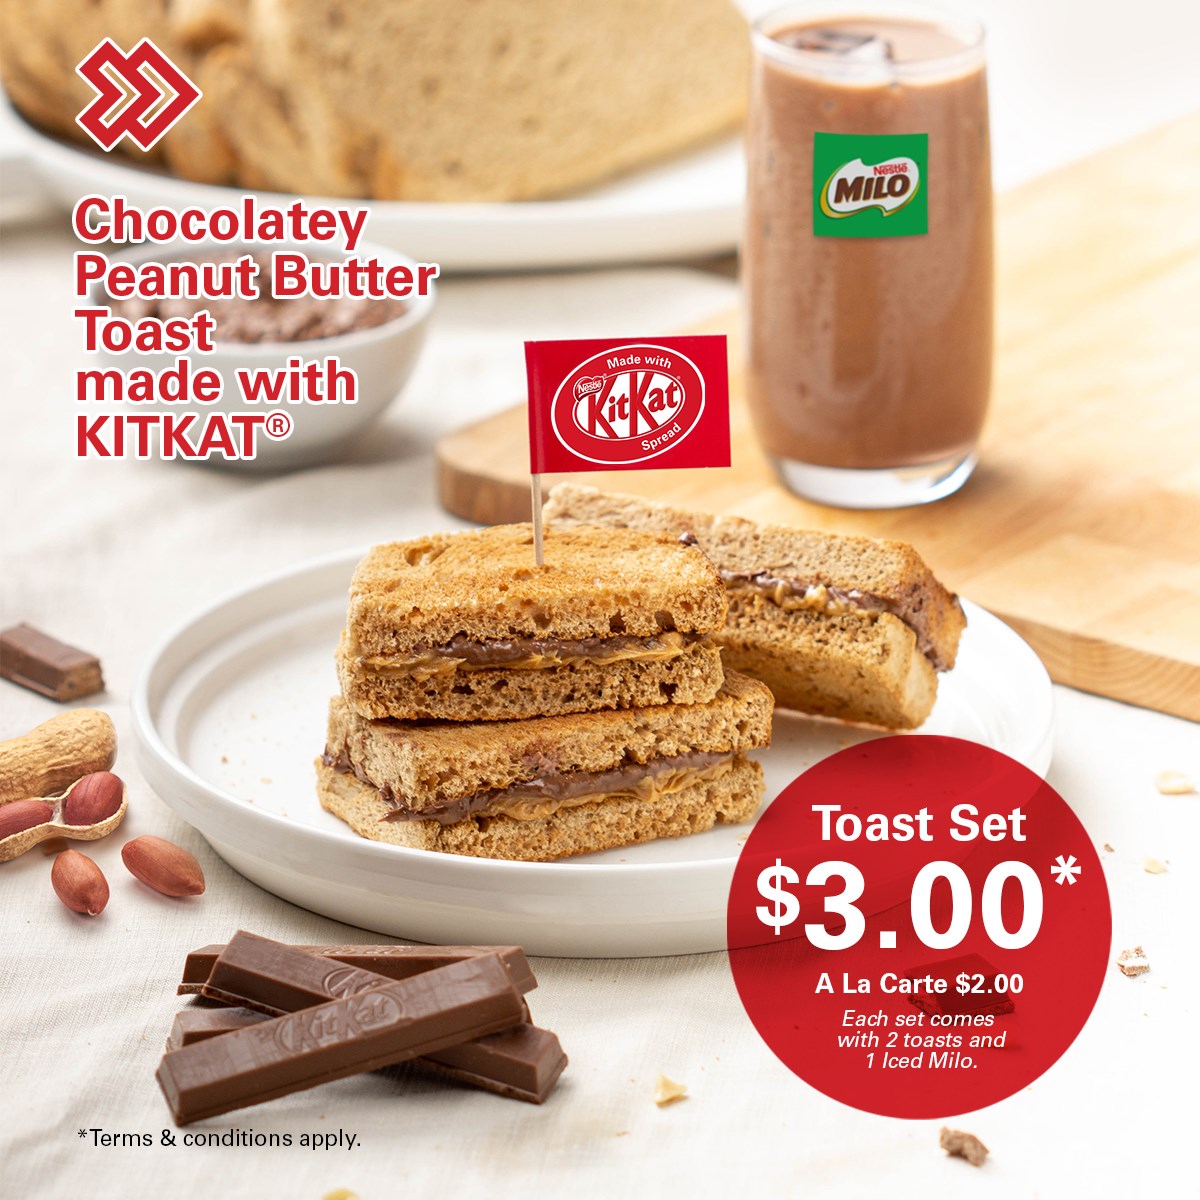 Kopitiam & Foodfare outlets has KitKat Toast from now till 30 Sep 21 - 2